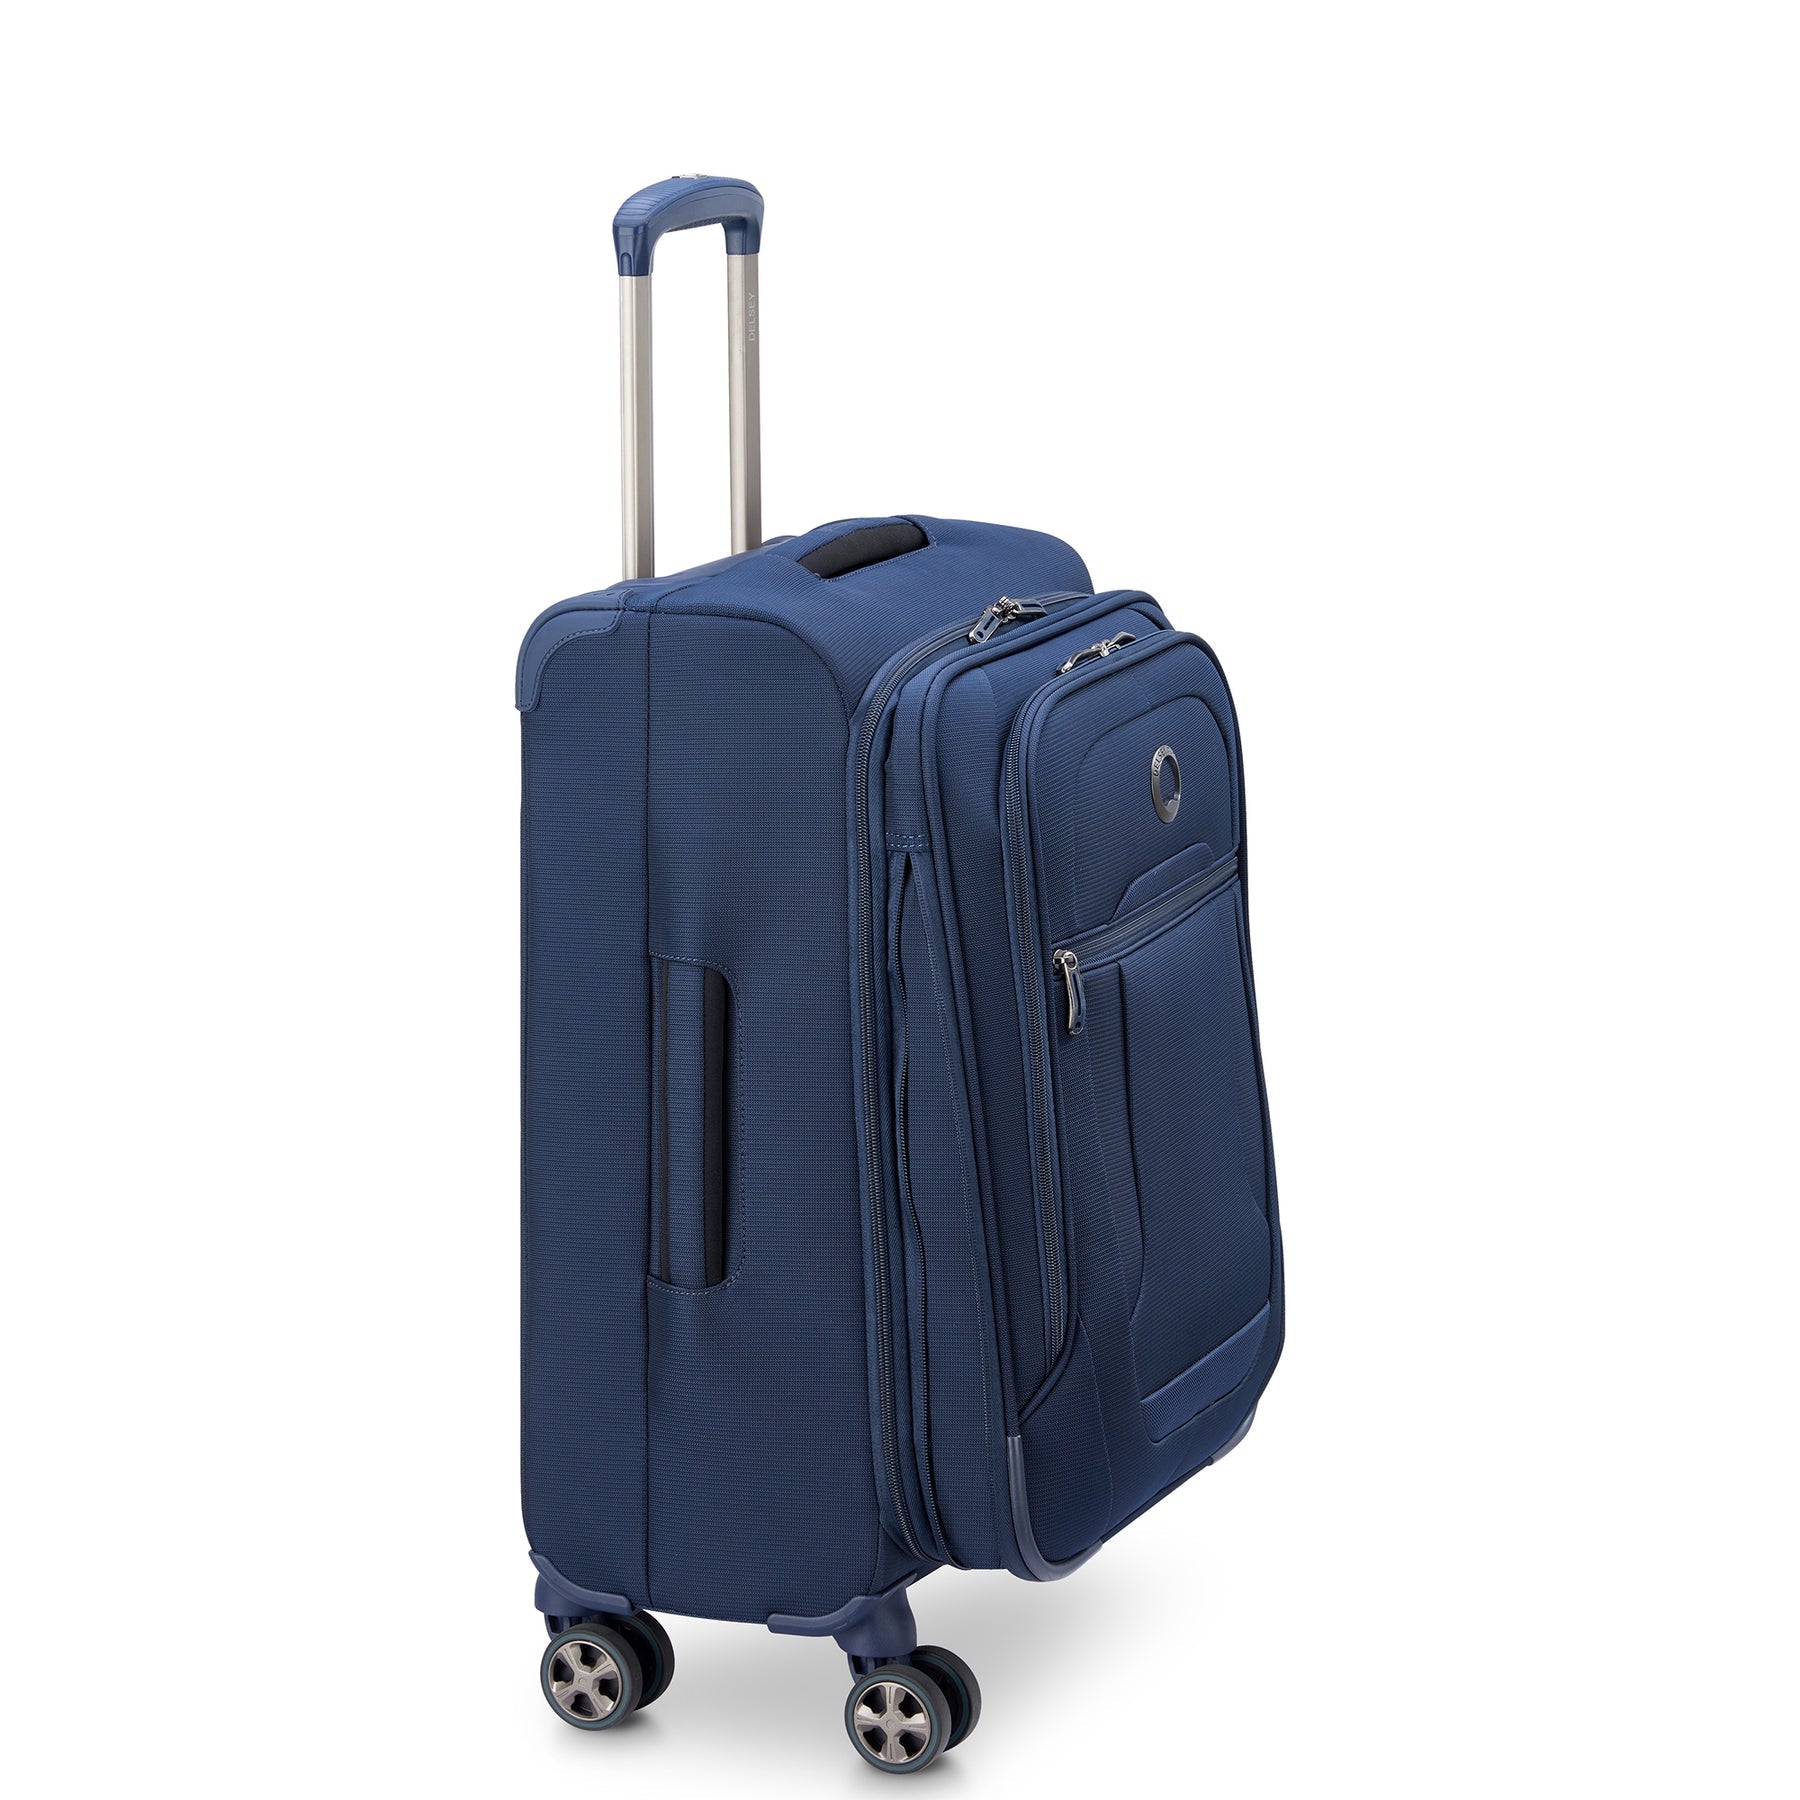 HELIUM DLX CARRY-ON - 21" SMALL